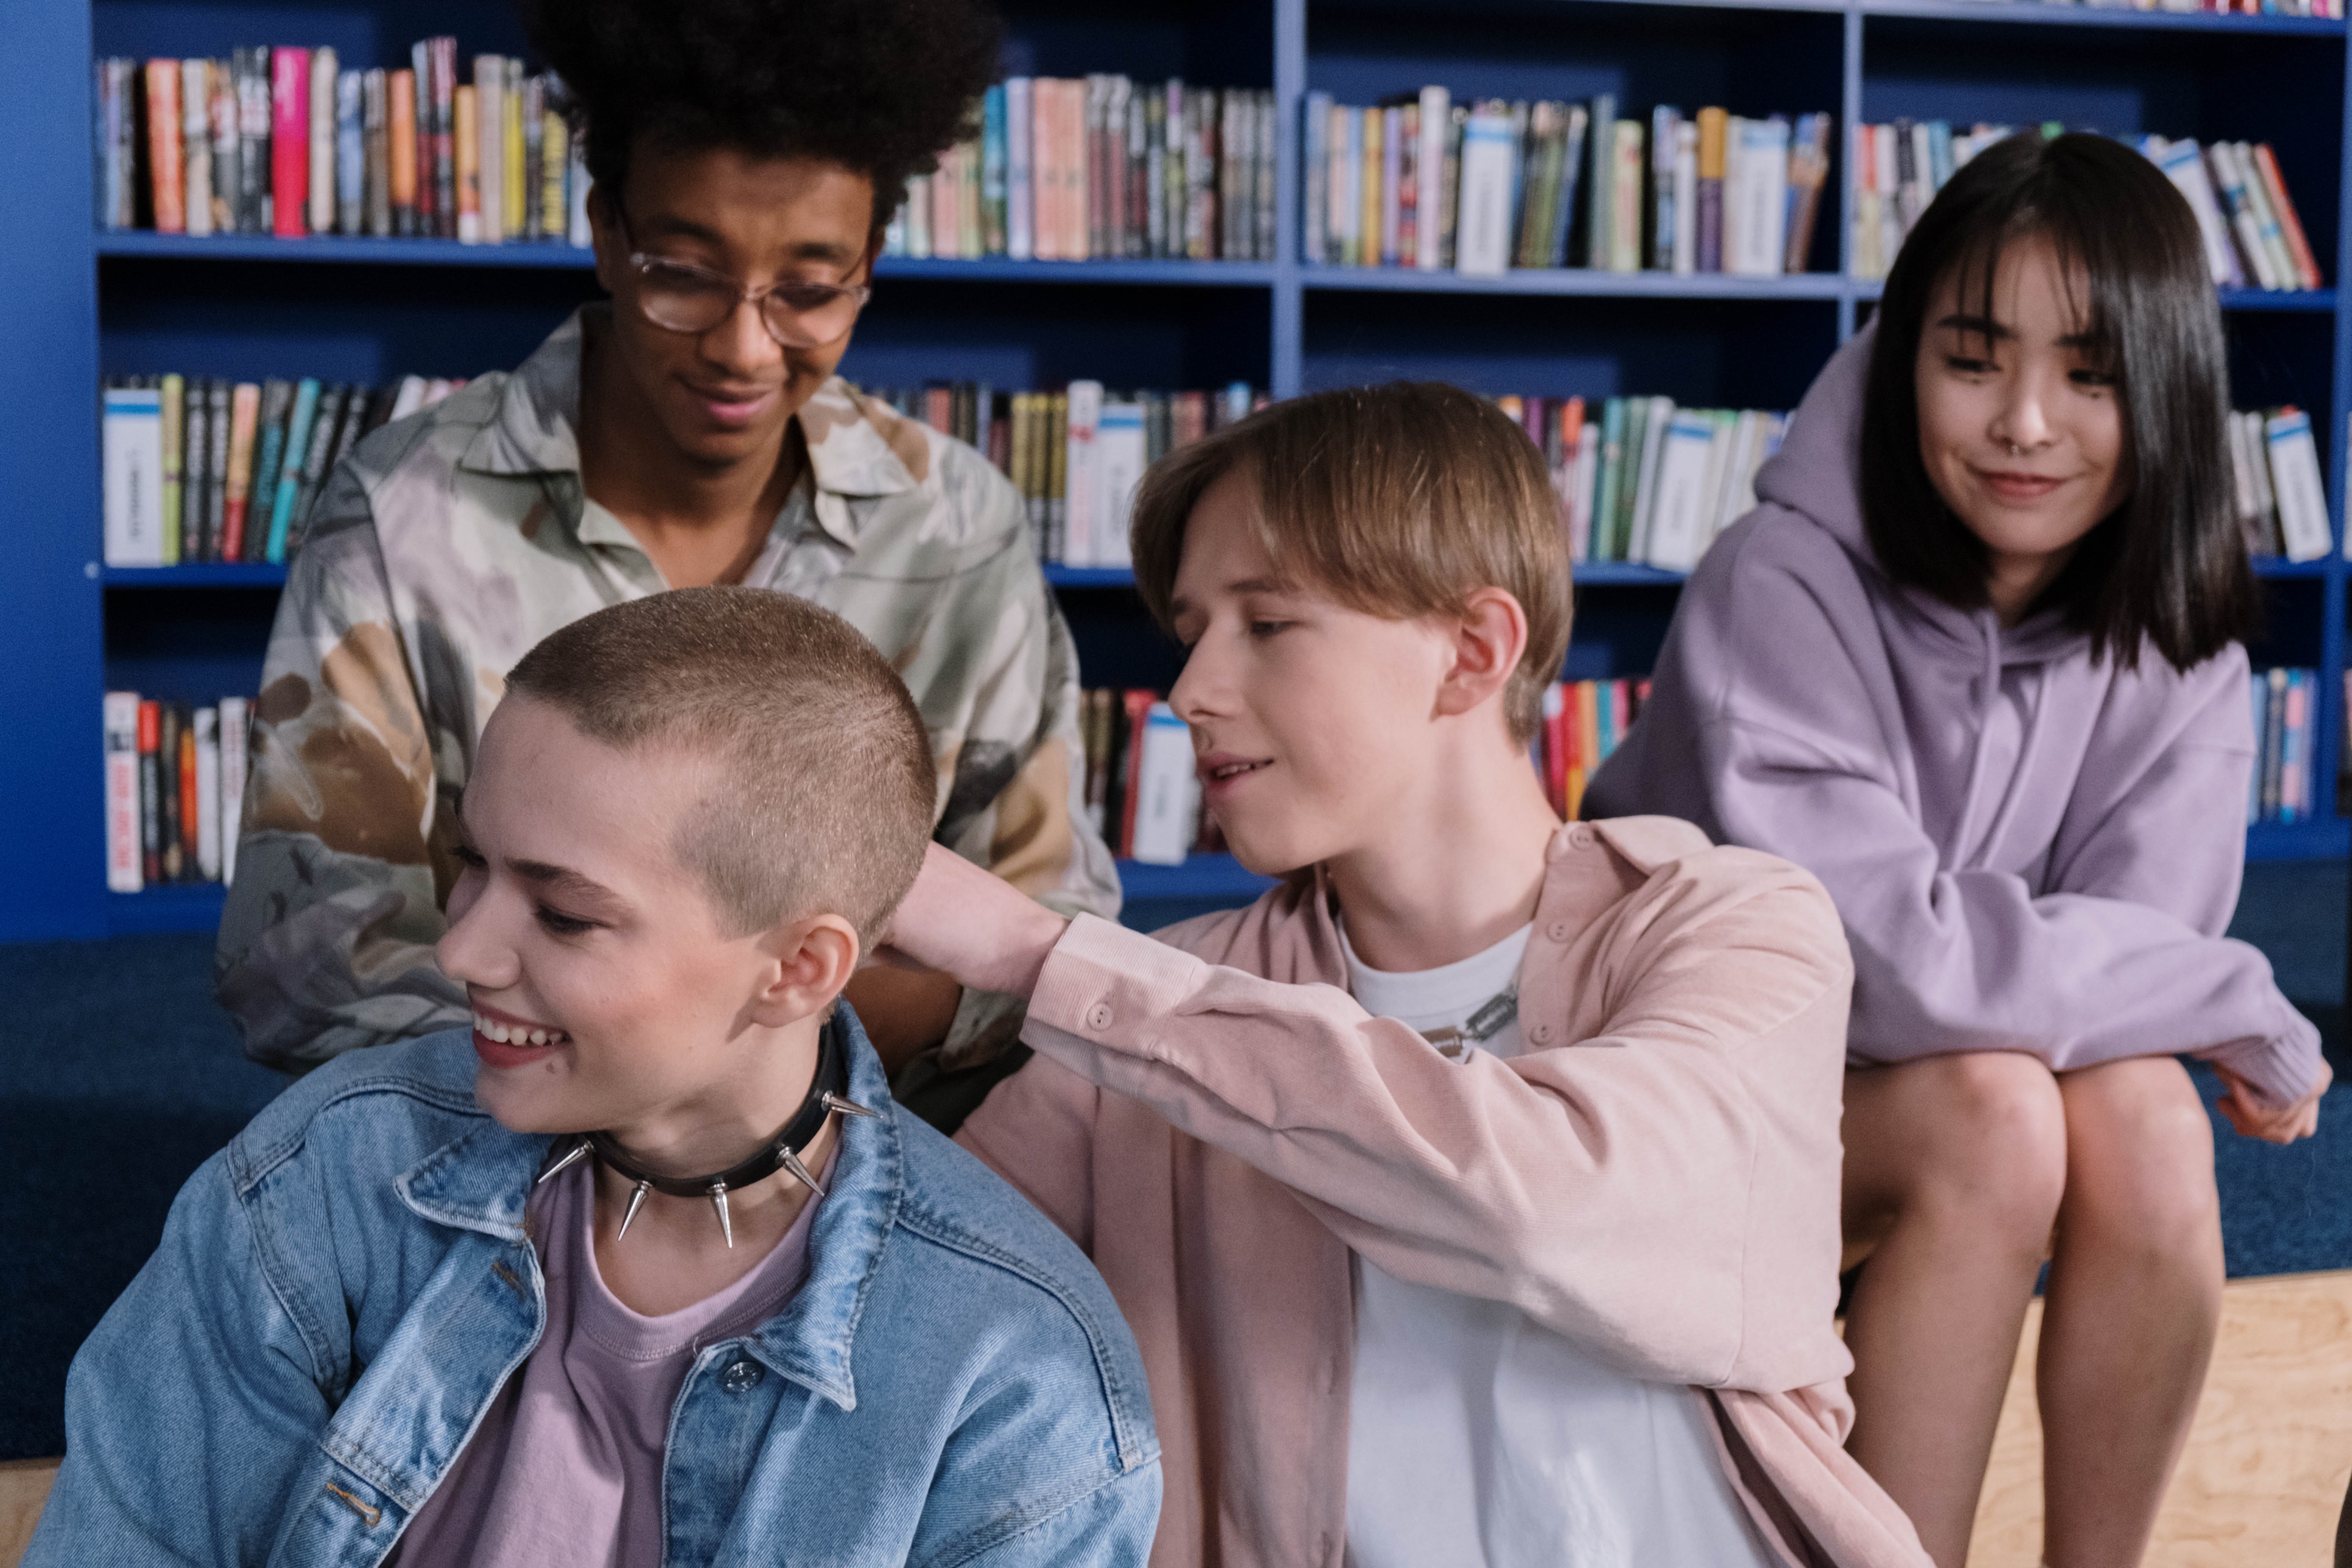 Group of teens sitting together in the library